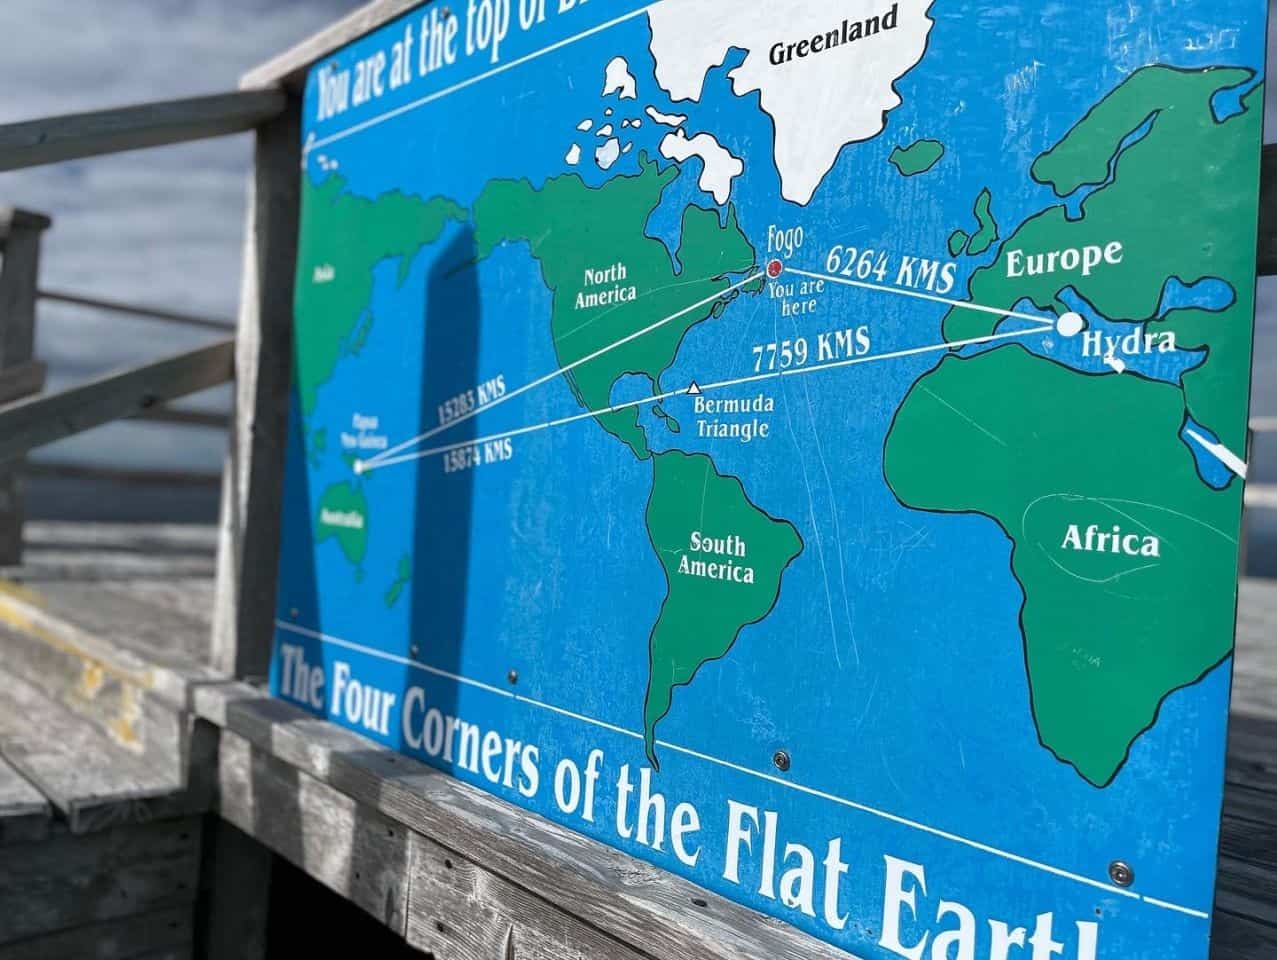 Newfoundland Canada Four Corners of the Flat Earth Map.